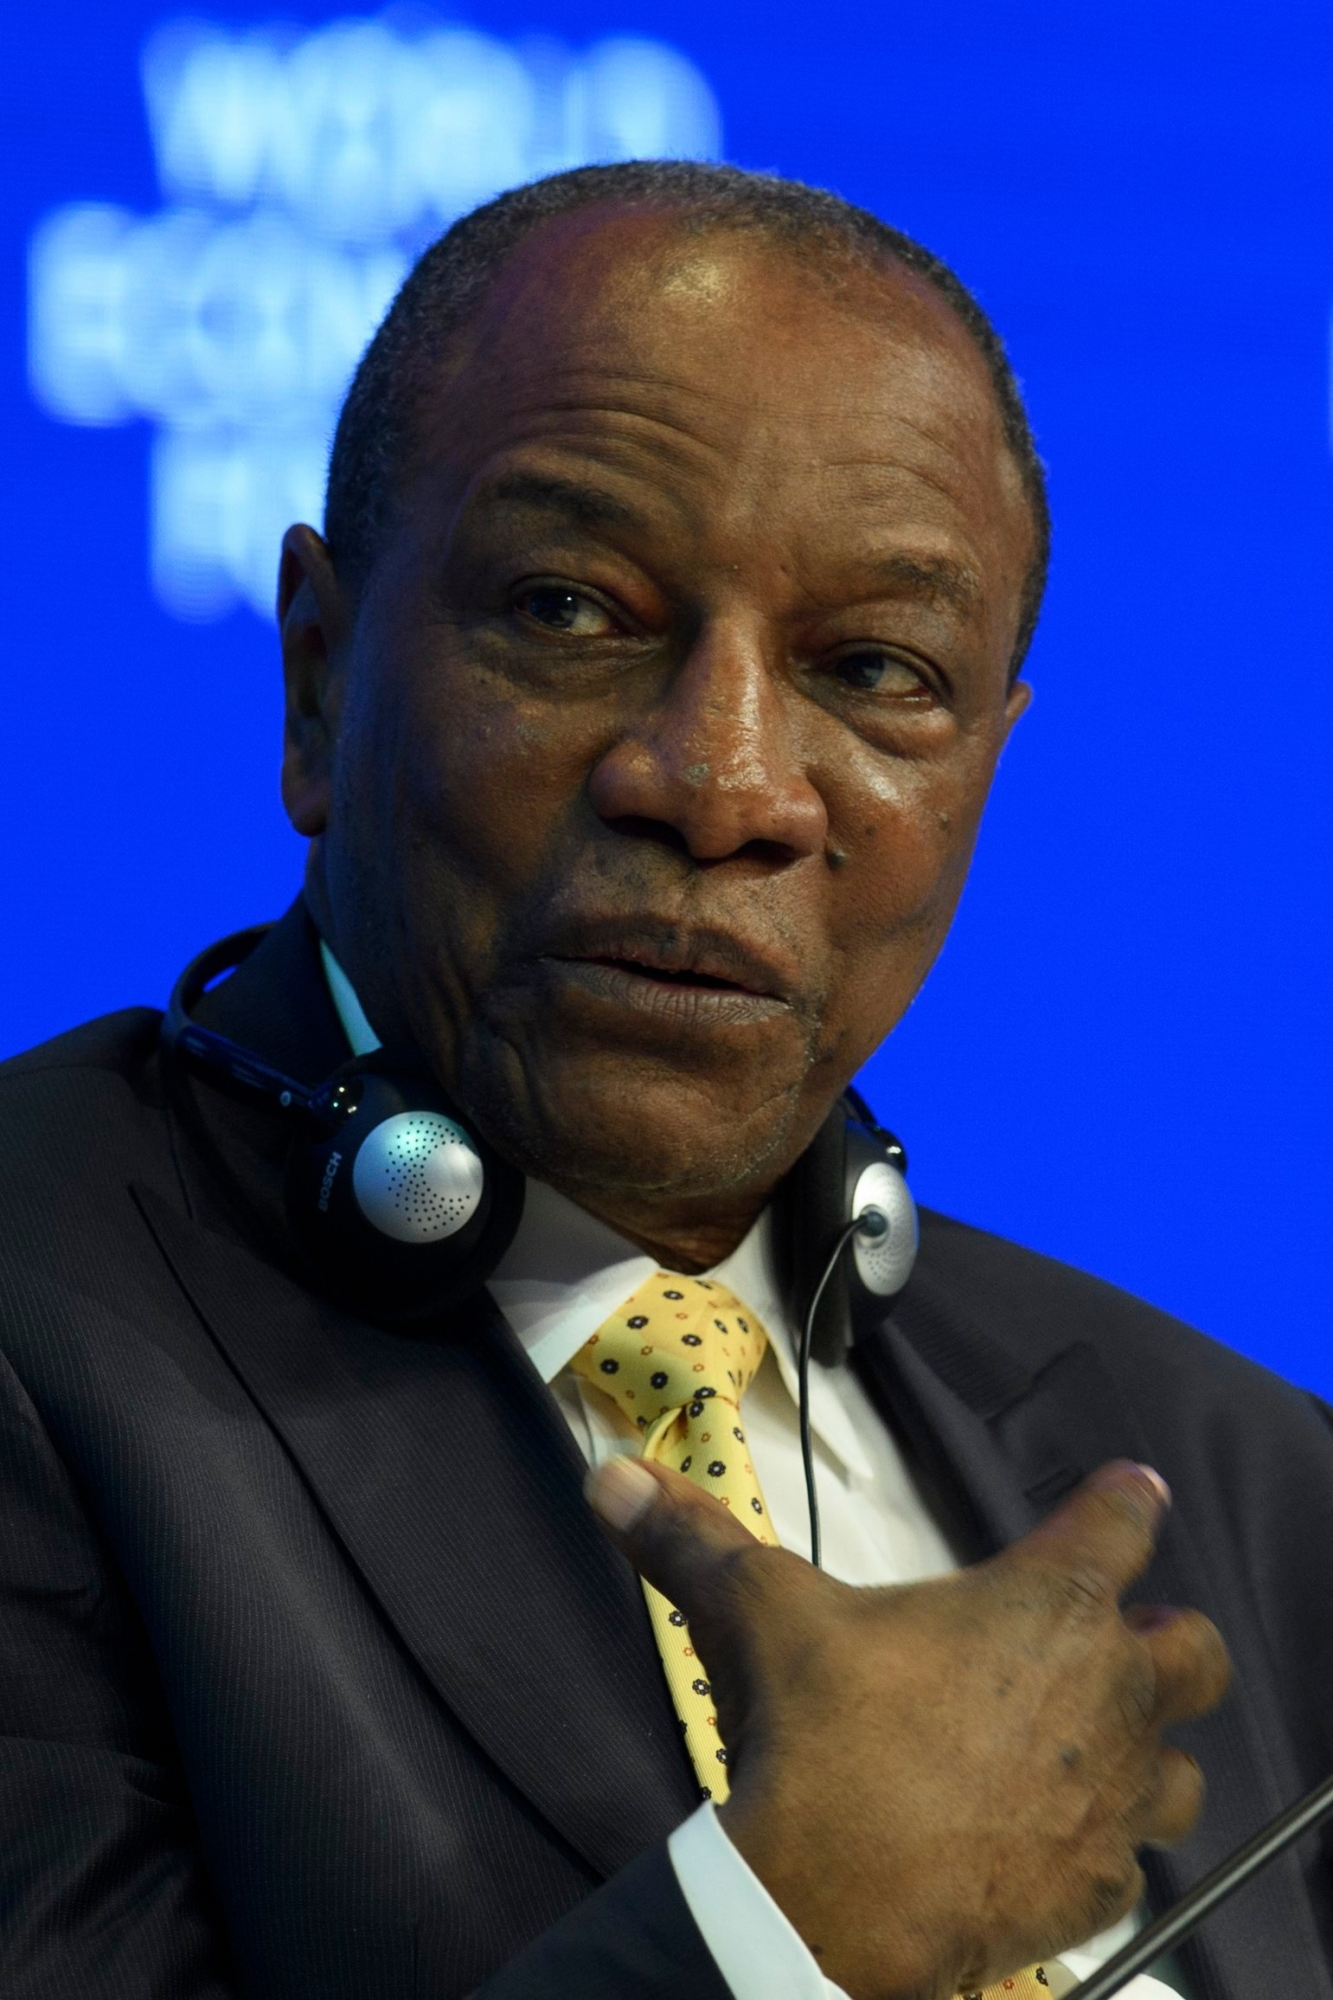 Alpha Conde, President of Guinea, speaks during a plenary session in the Congress Hall at the 47th annual meeting of the World Economic Forum, WEF, in Davos, Switzerland, Thursday, January 19, 2017. The meeting brings together enterpreneurs, scientists, chief executive and political leaders in Davos January 17 to 20. (KEYSTONE/Gian Ehrenzeller) SWITZERLAND WEF 2017 DAVOS